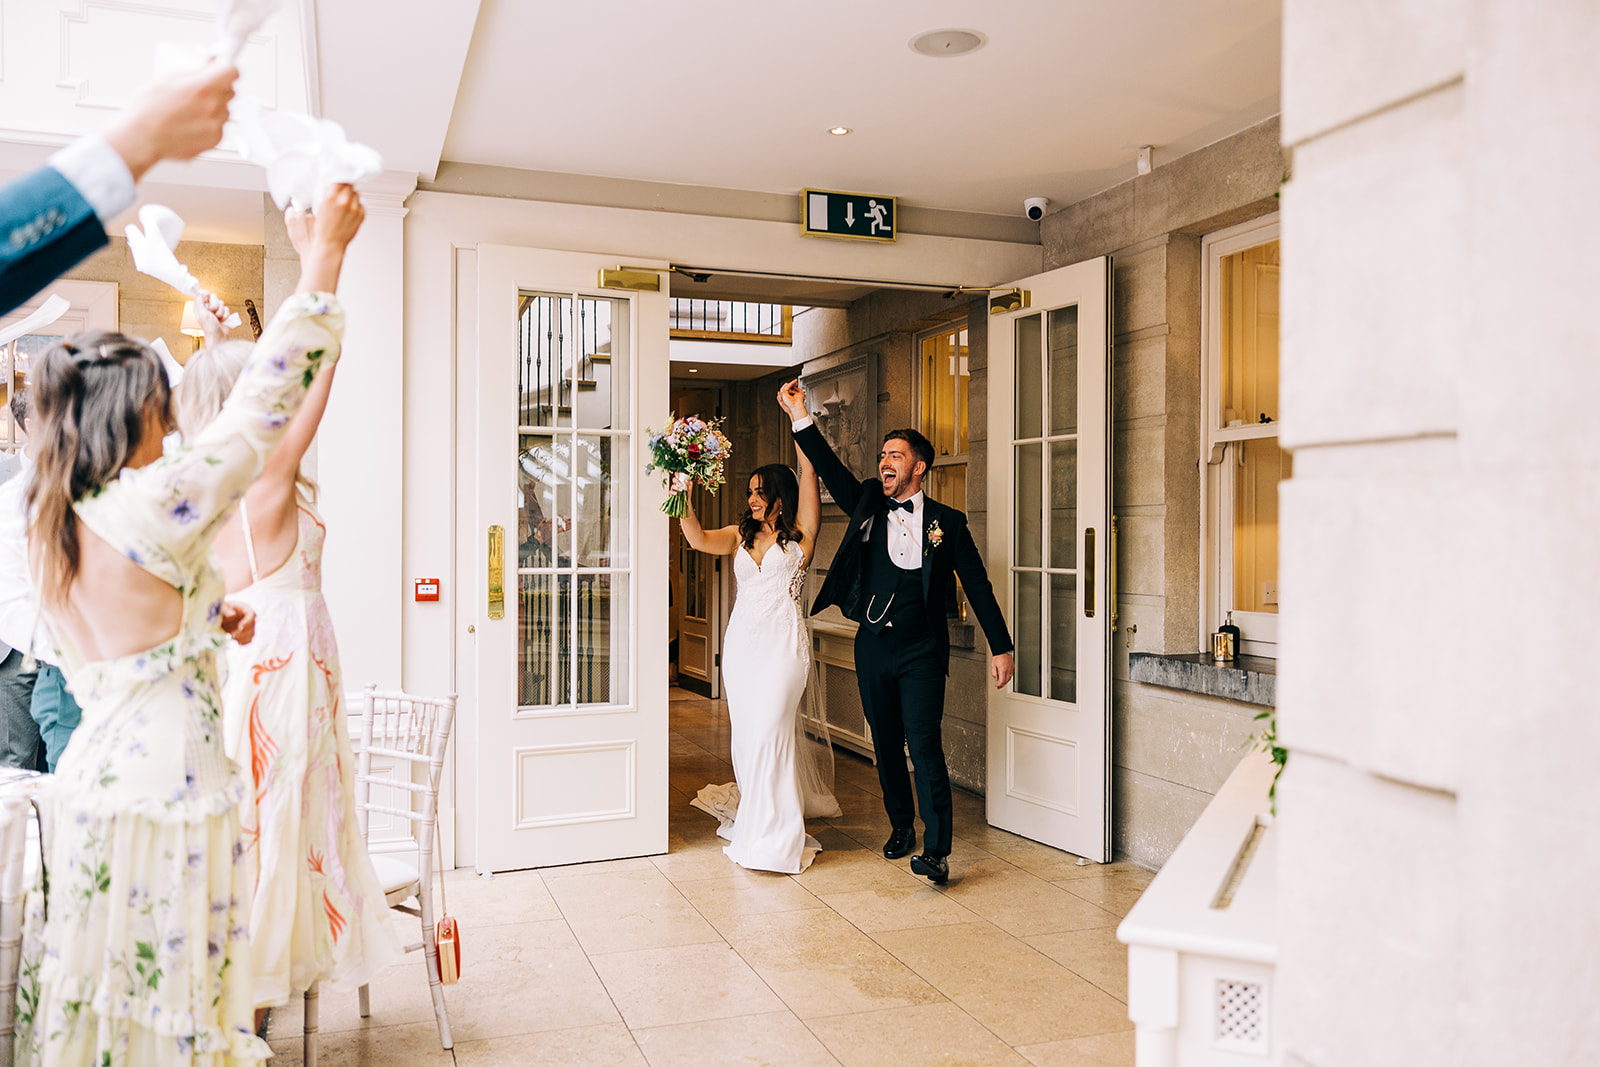 Esther and Gavin enter the orangery at tankardstown house to cheers and claps